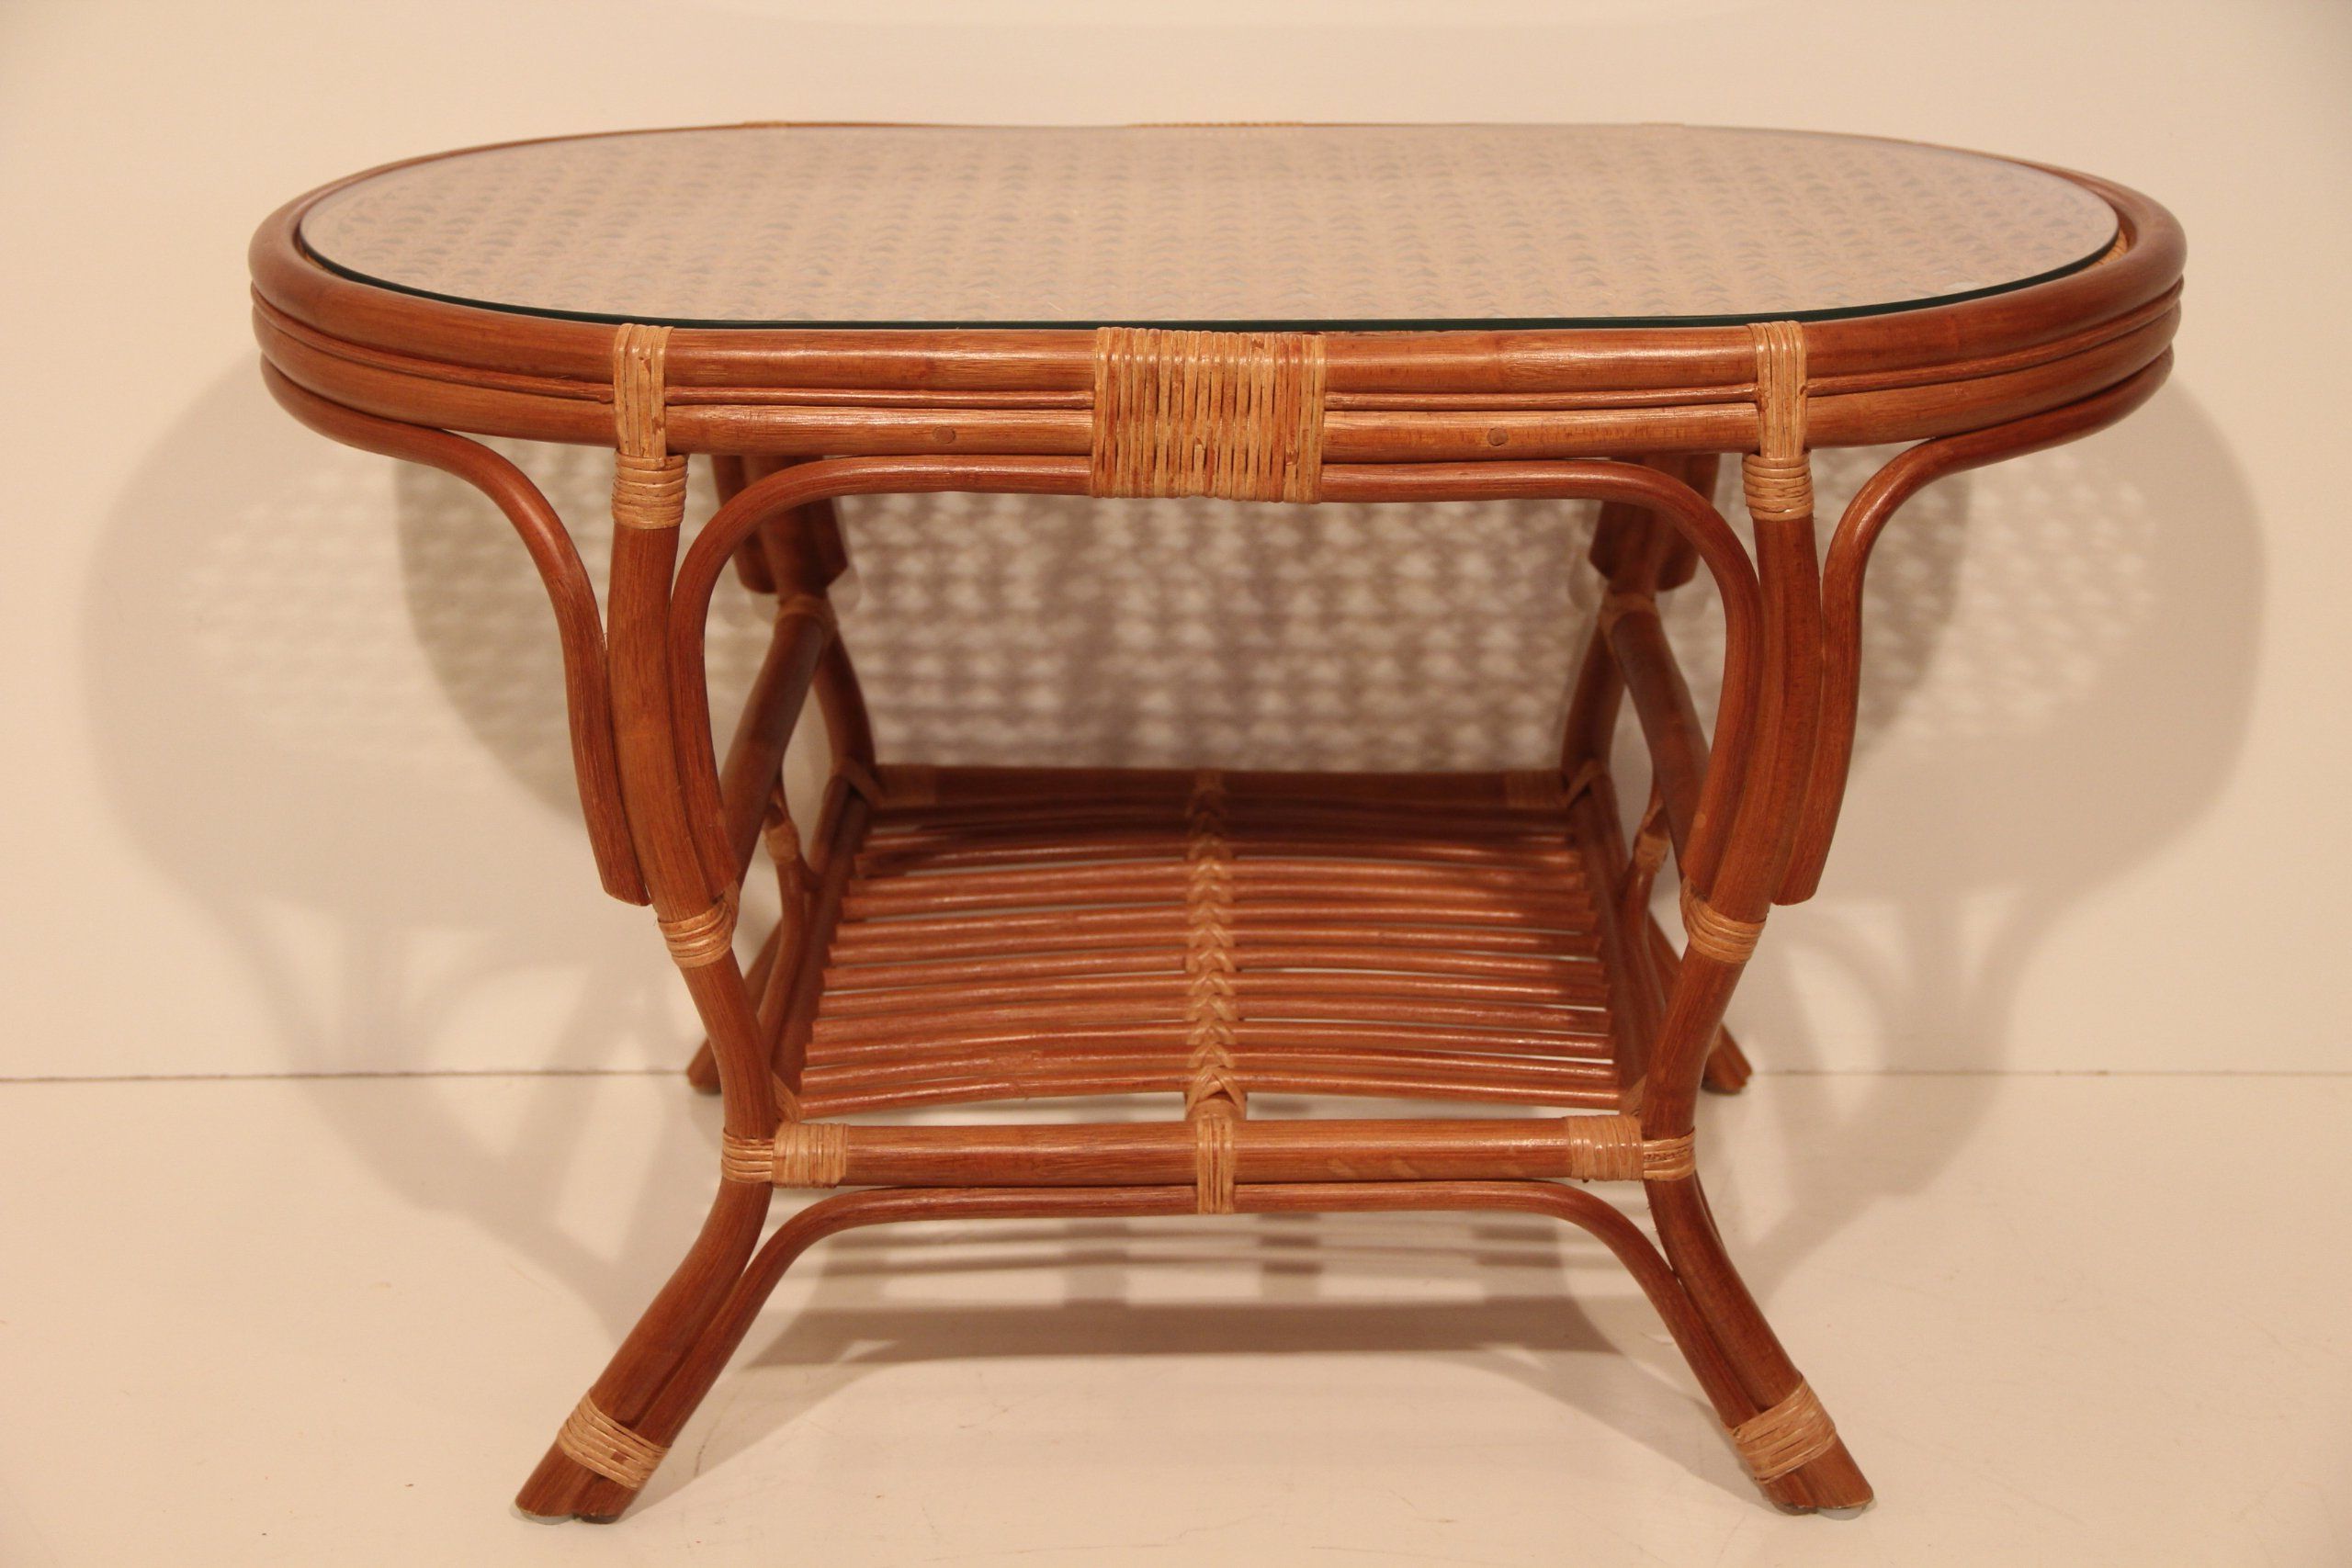 Famous Natural Woven Banana Coffee Tables With Regard To Pelangi Oval Coffee Table With Glass Top Natural Rattan (Gallery 19 of 20)